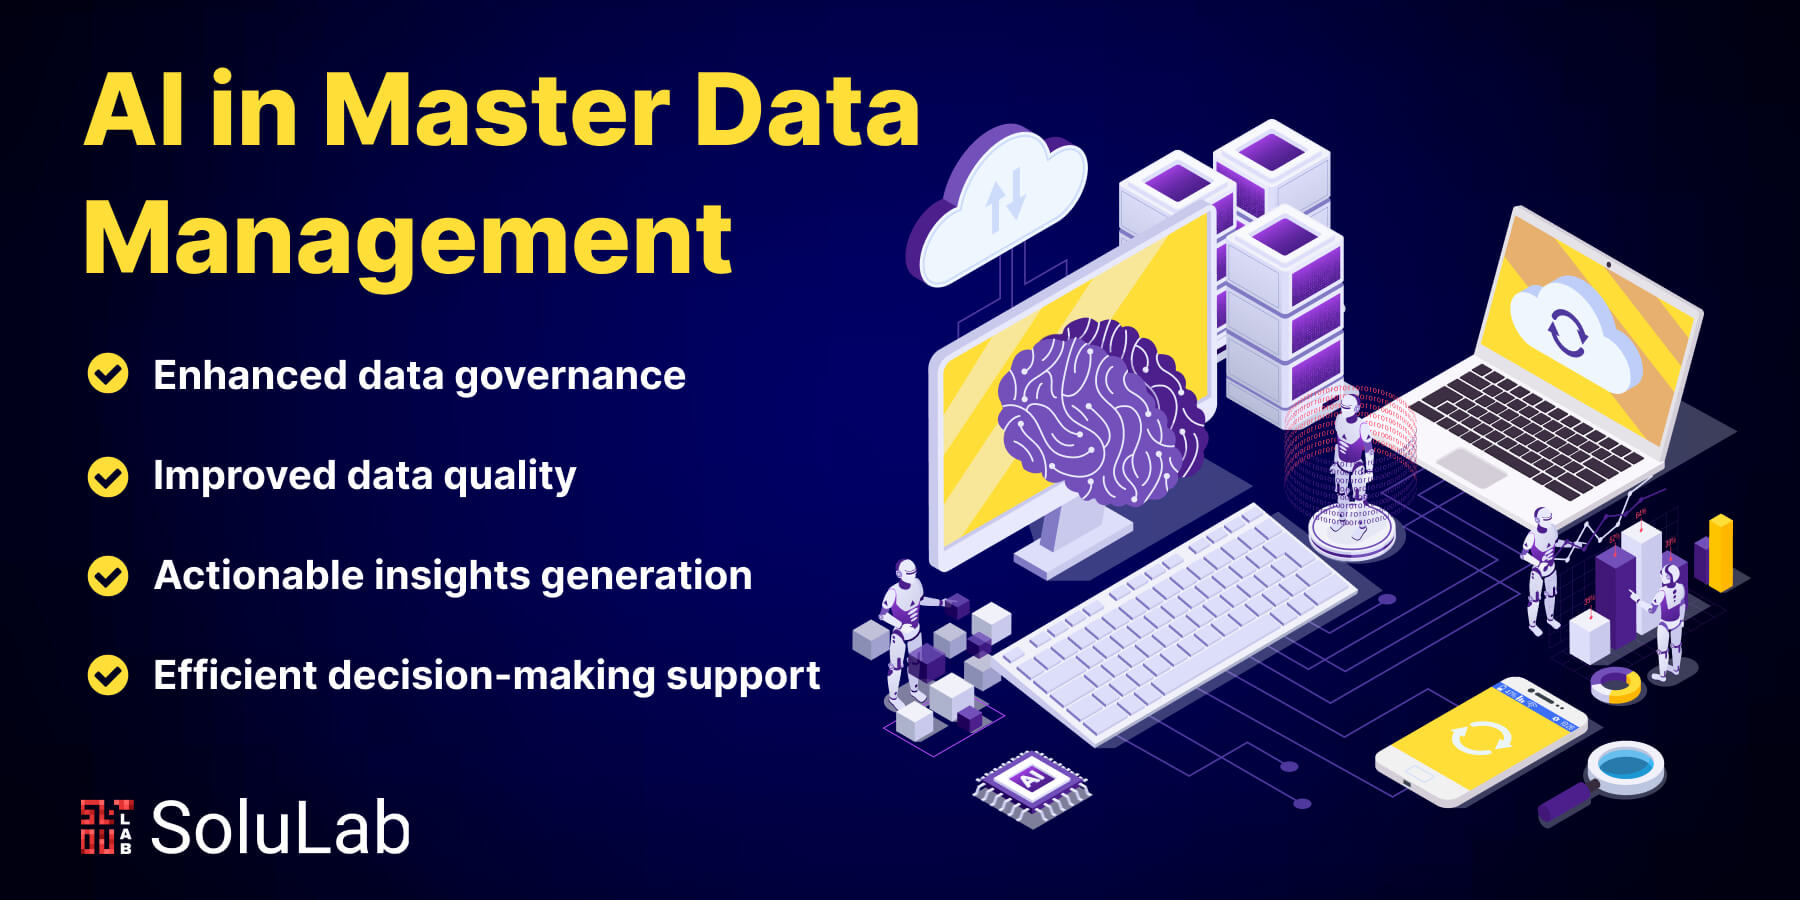 AI in Master Data Management